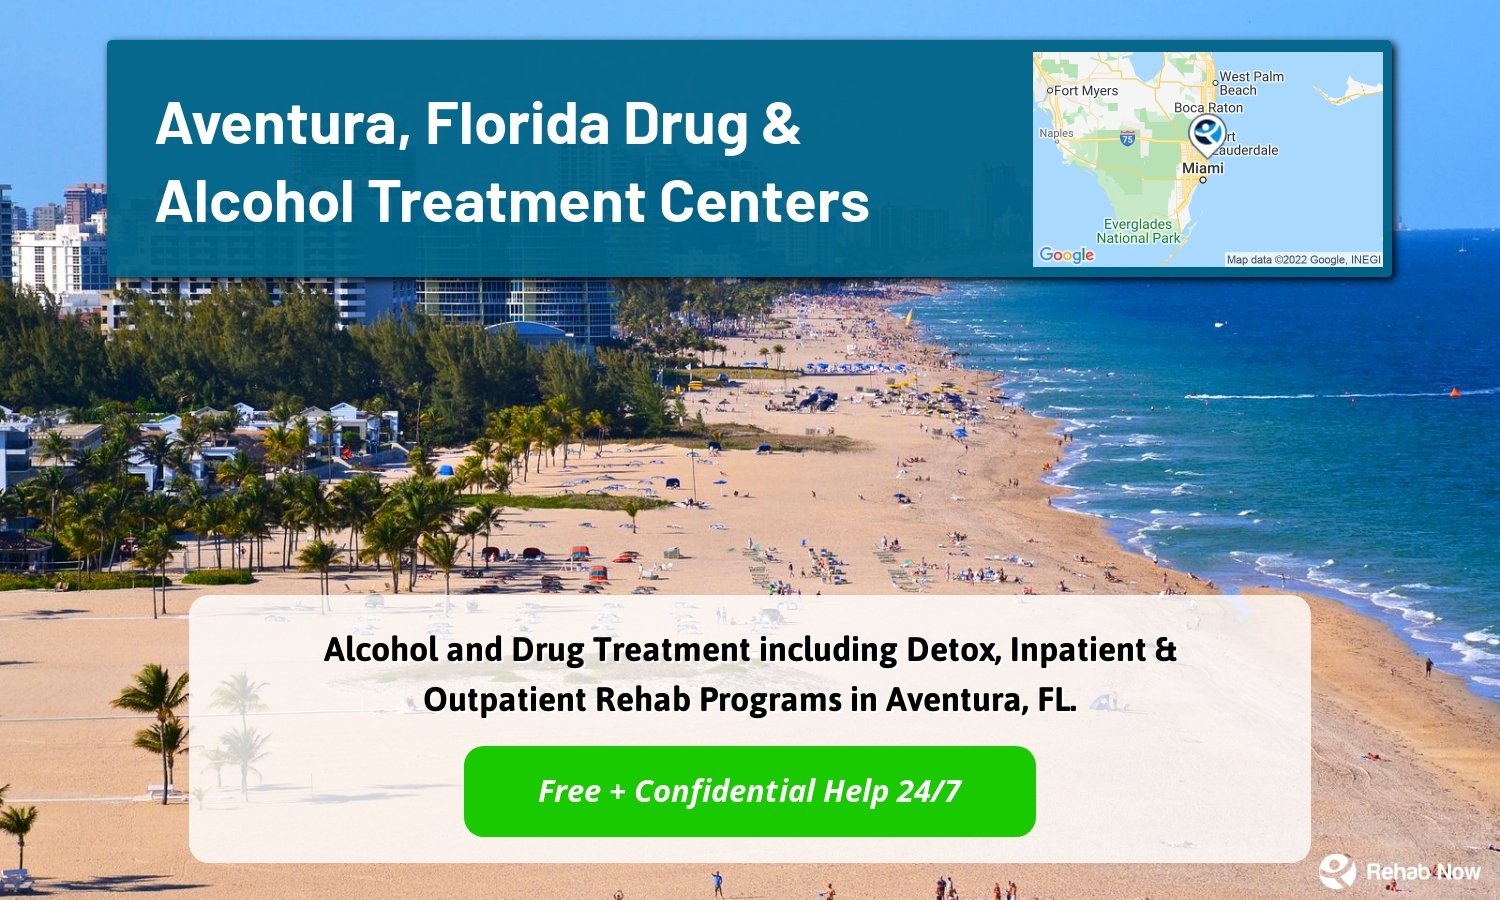 Alcohol and Drug Treatment including Detox, Inpatient & Outpatient Rehab Programs in Aventura, FL.